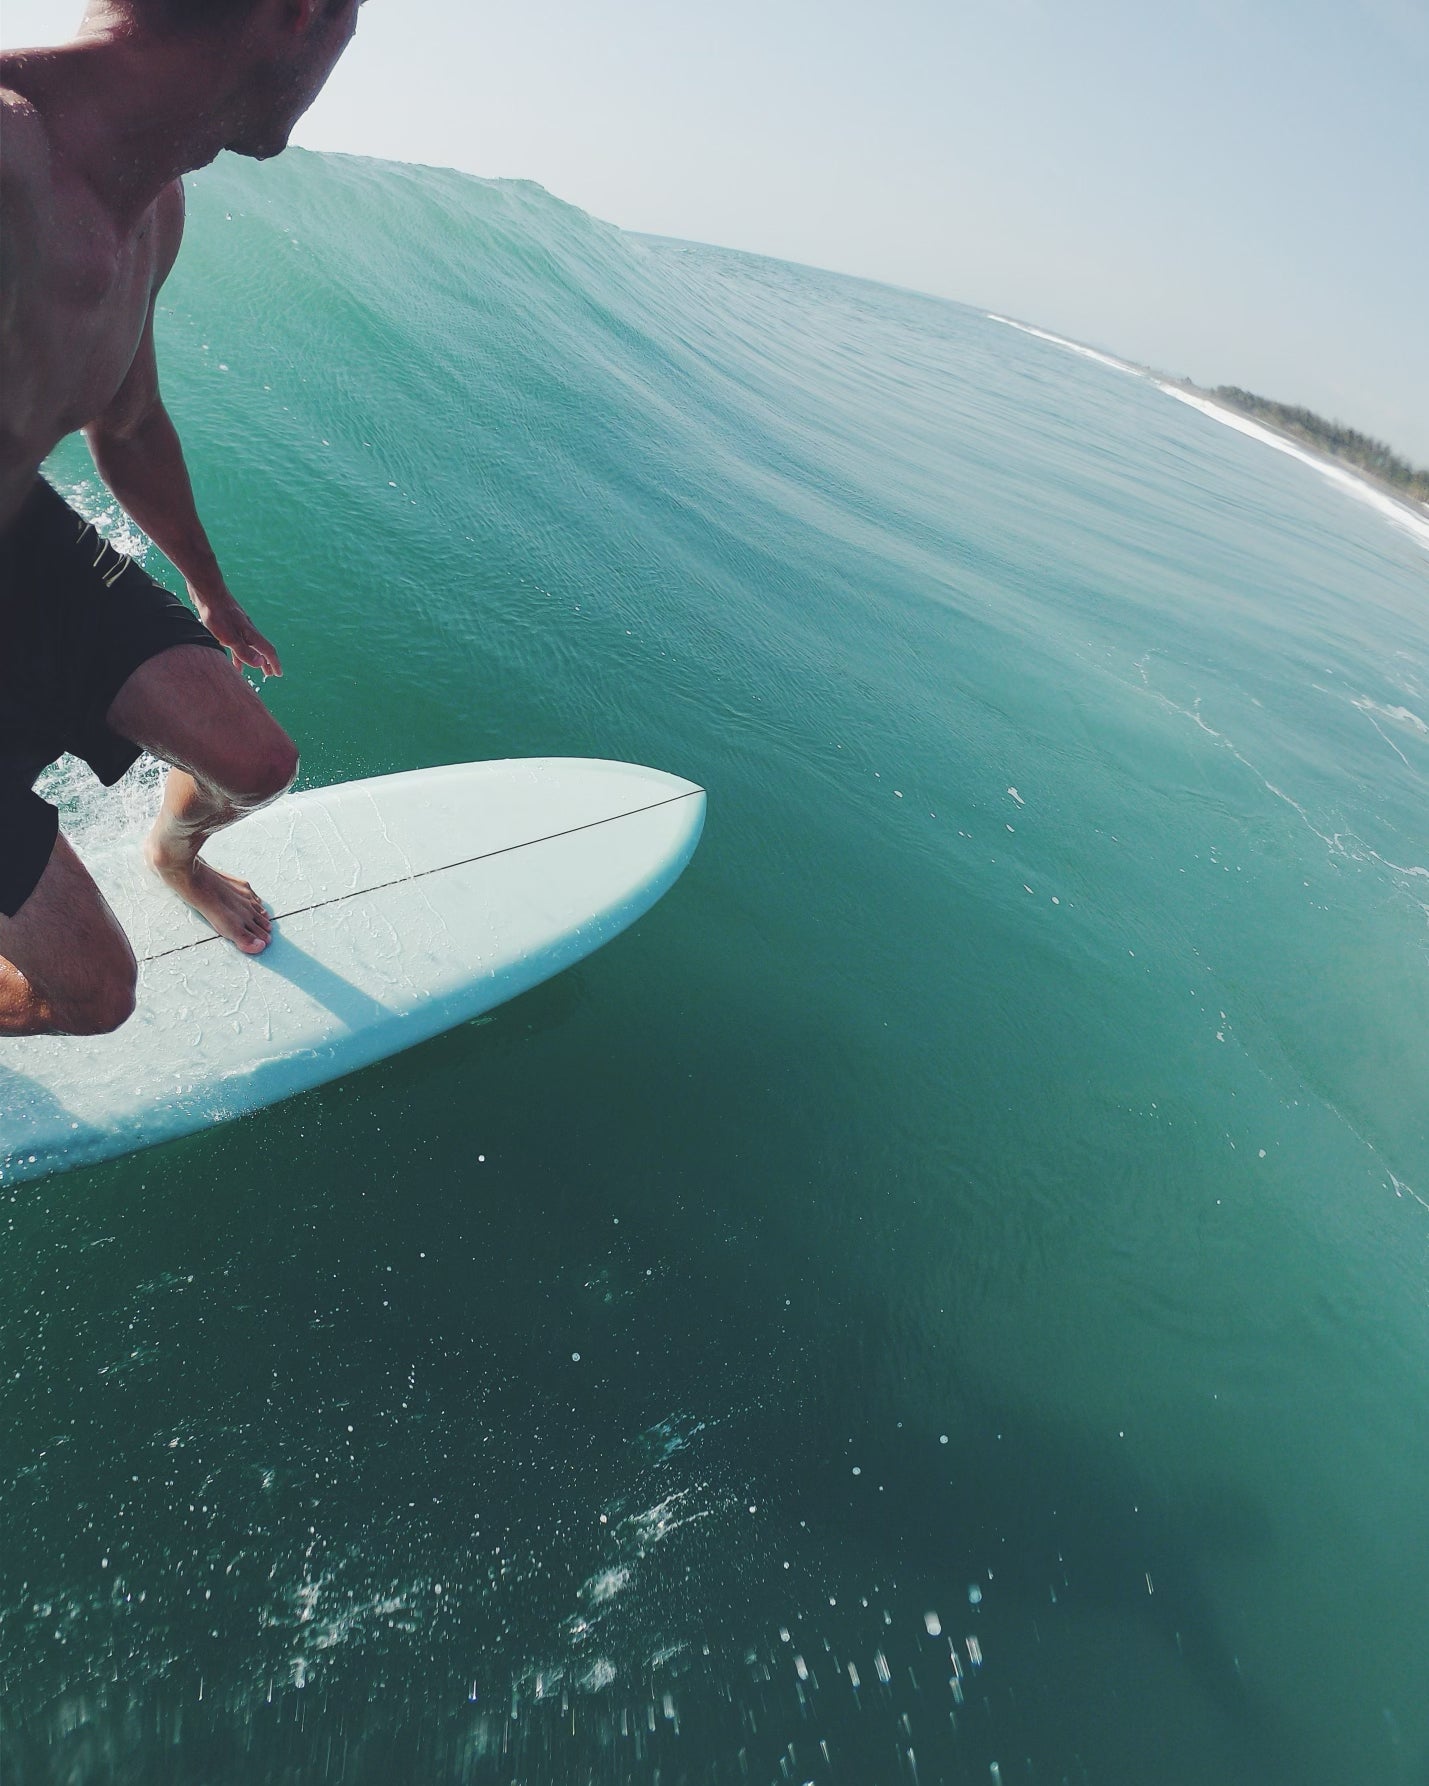 3 Tips for Rapidly Improving Your Surfing: